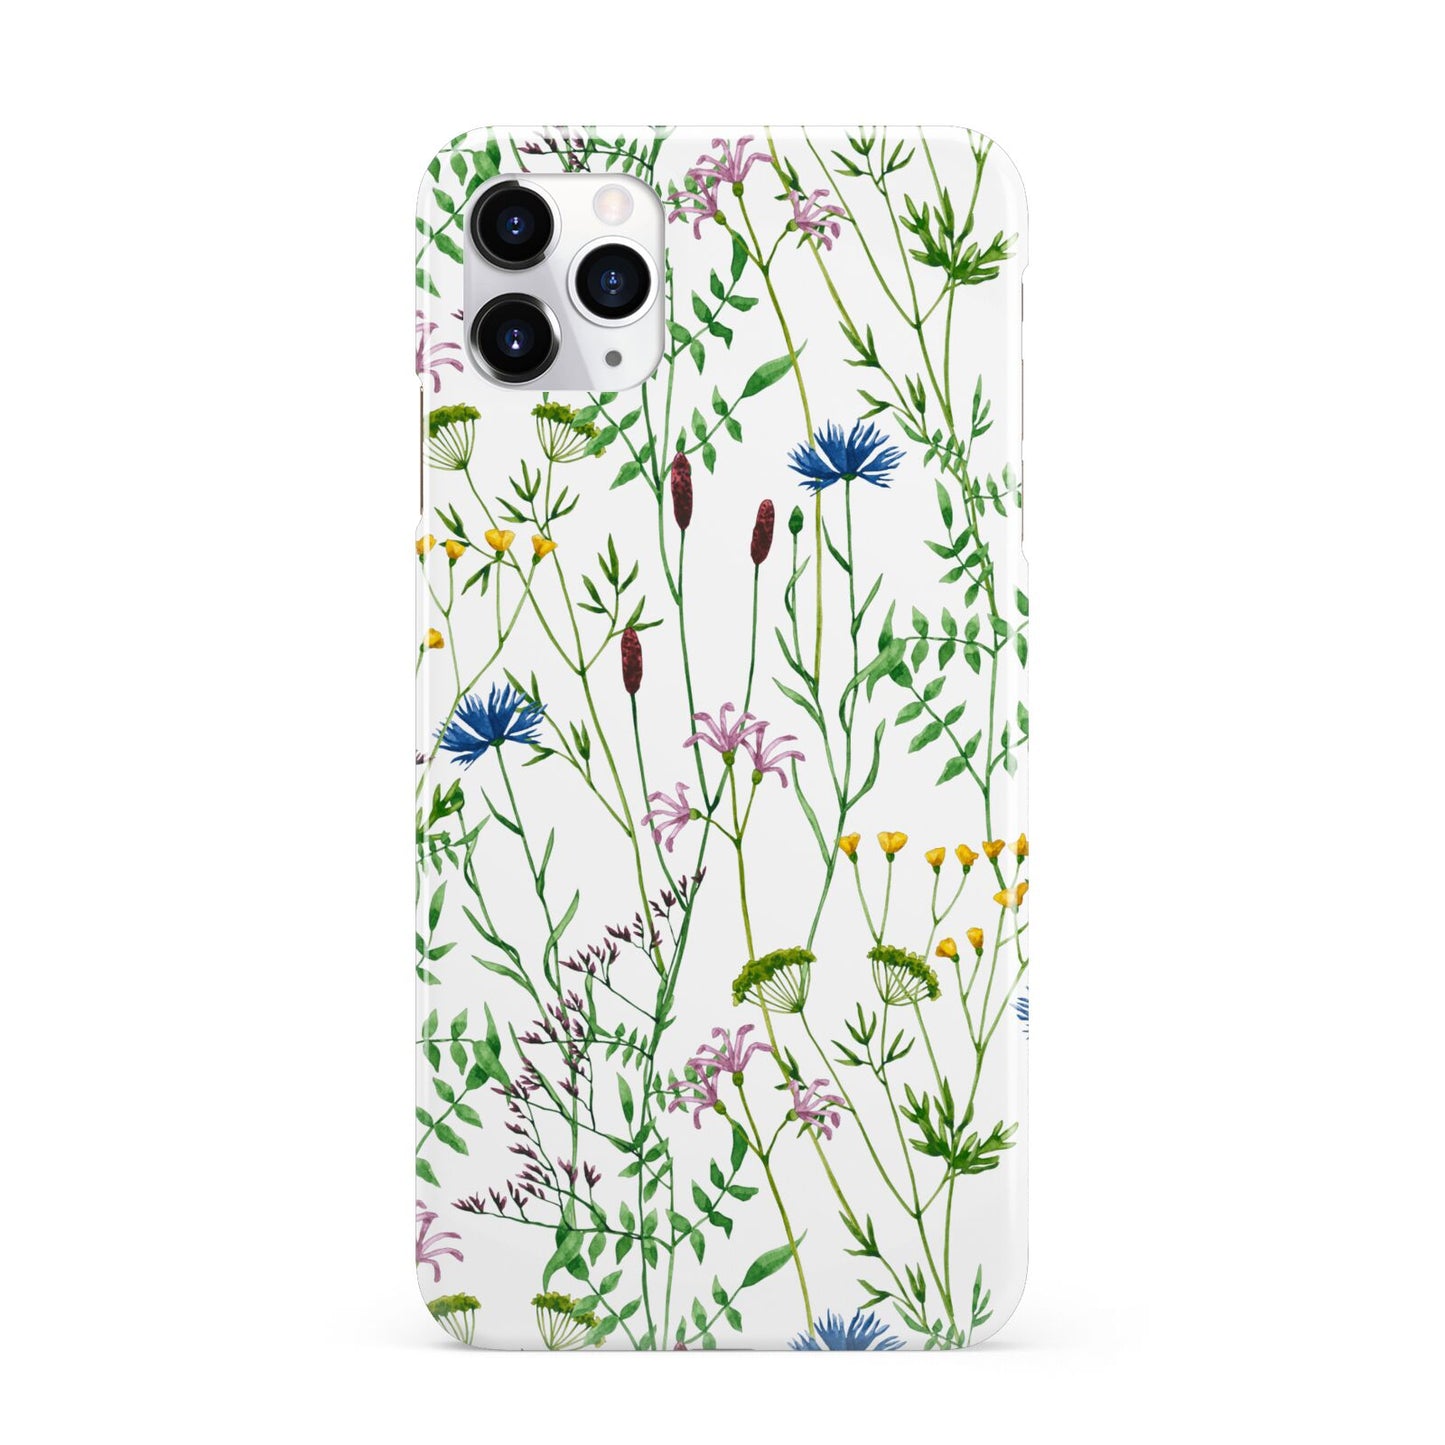 Wildflowers iPhone 11 Pro Max 3D Snap Case